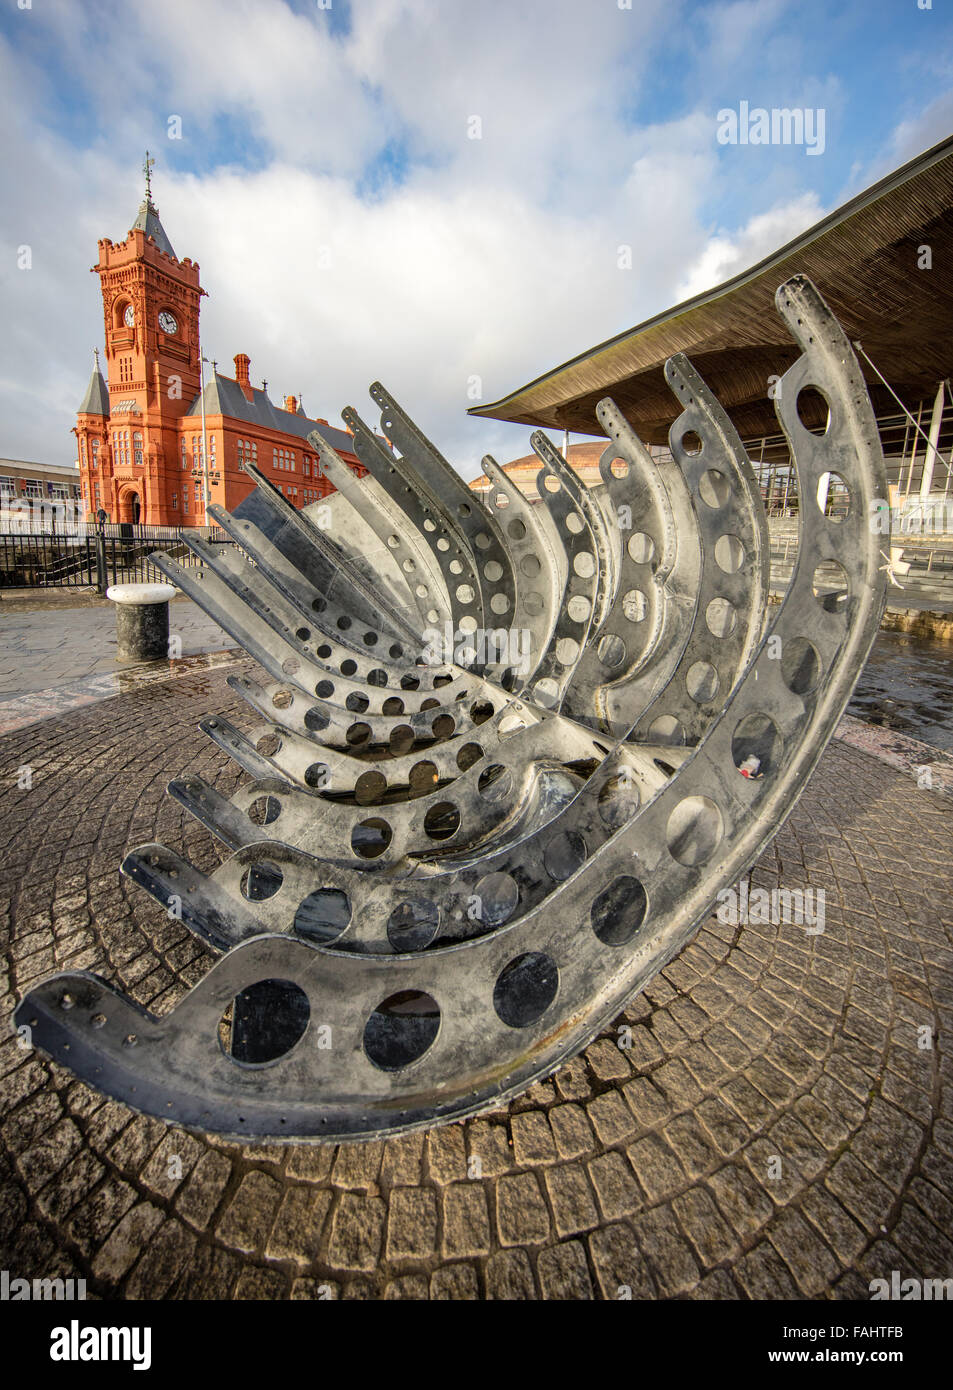 Merchant Seafarer's Memorial Sculpture and the Pierhead Building at Cardiff Bay South Wales Stock Photo